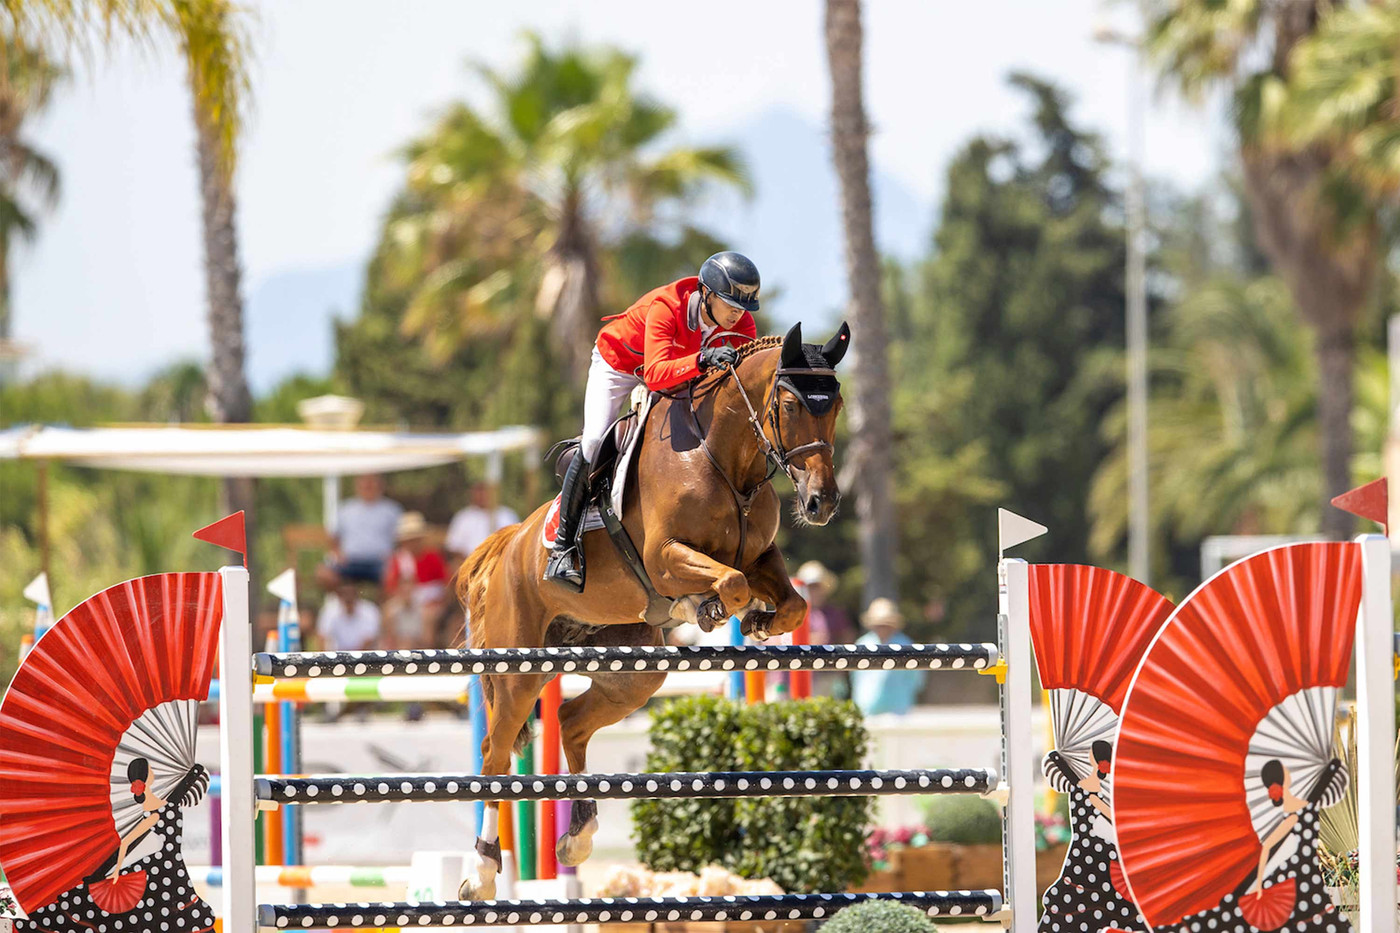 world of showjumping live streaming